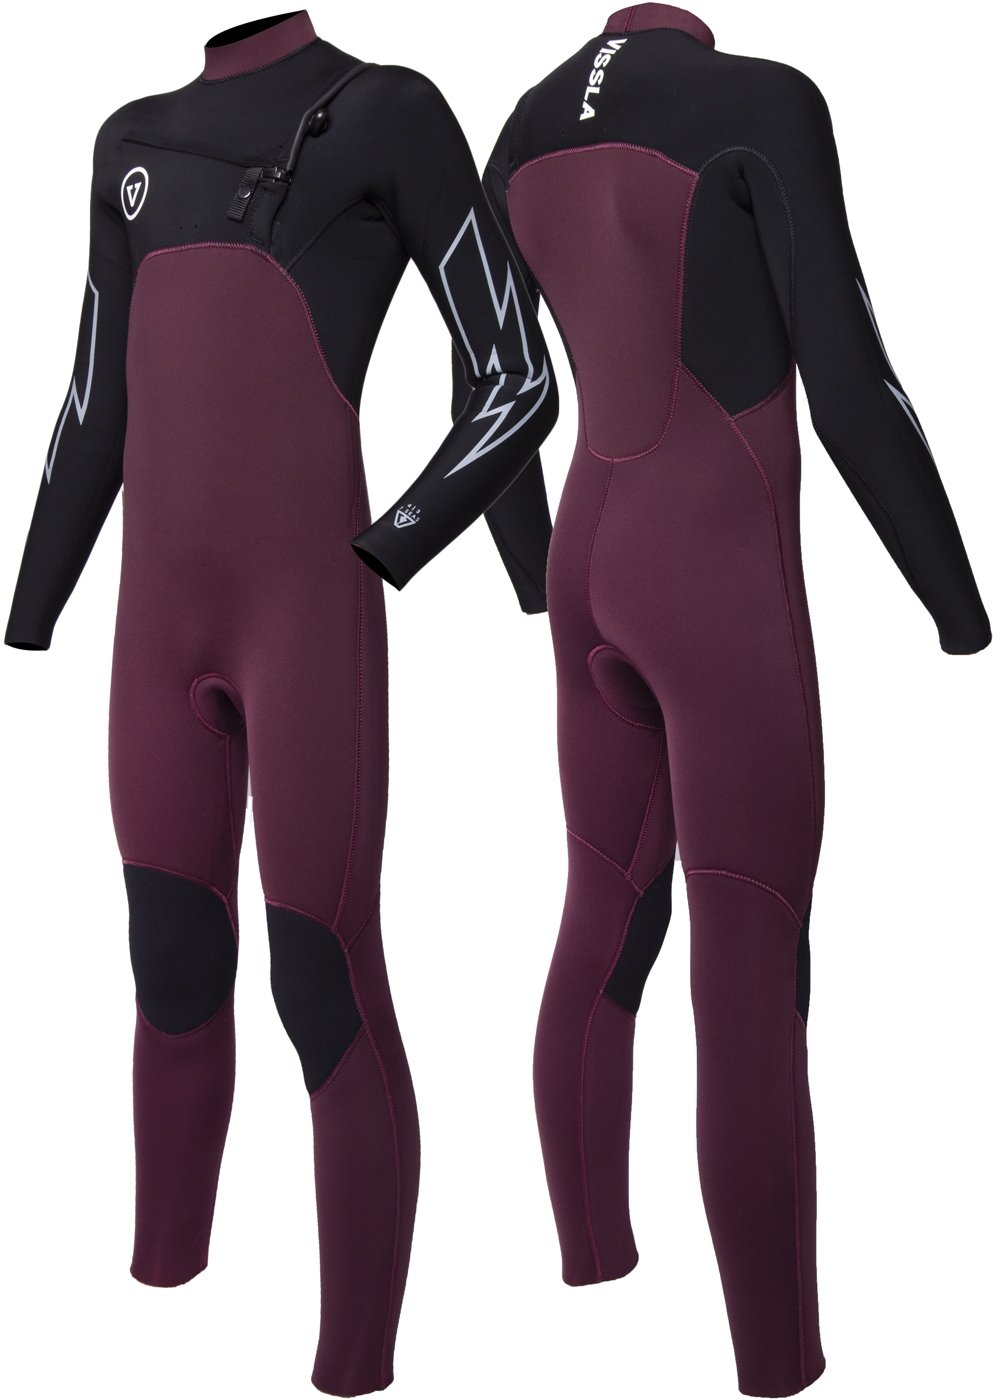 Vissla Boys wine 7 Seas 4-3 bolt chest zip full wetsuit. front and back view